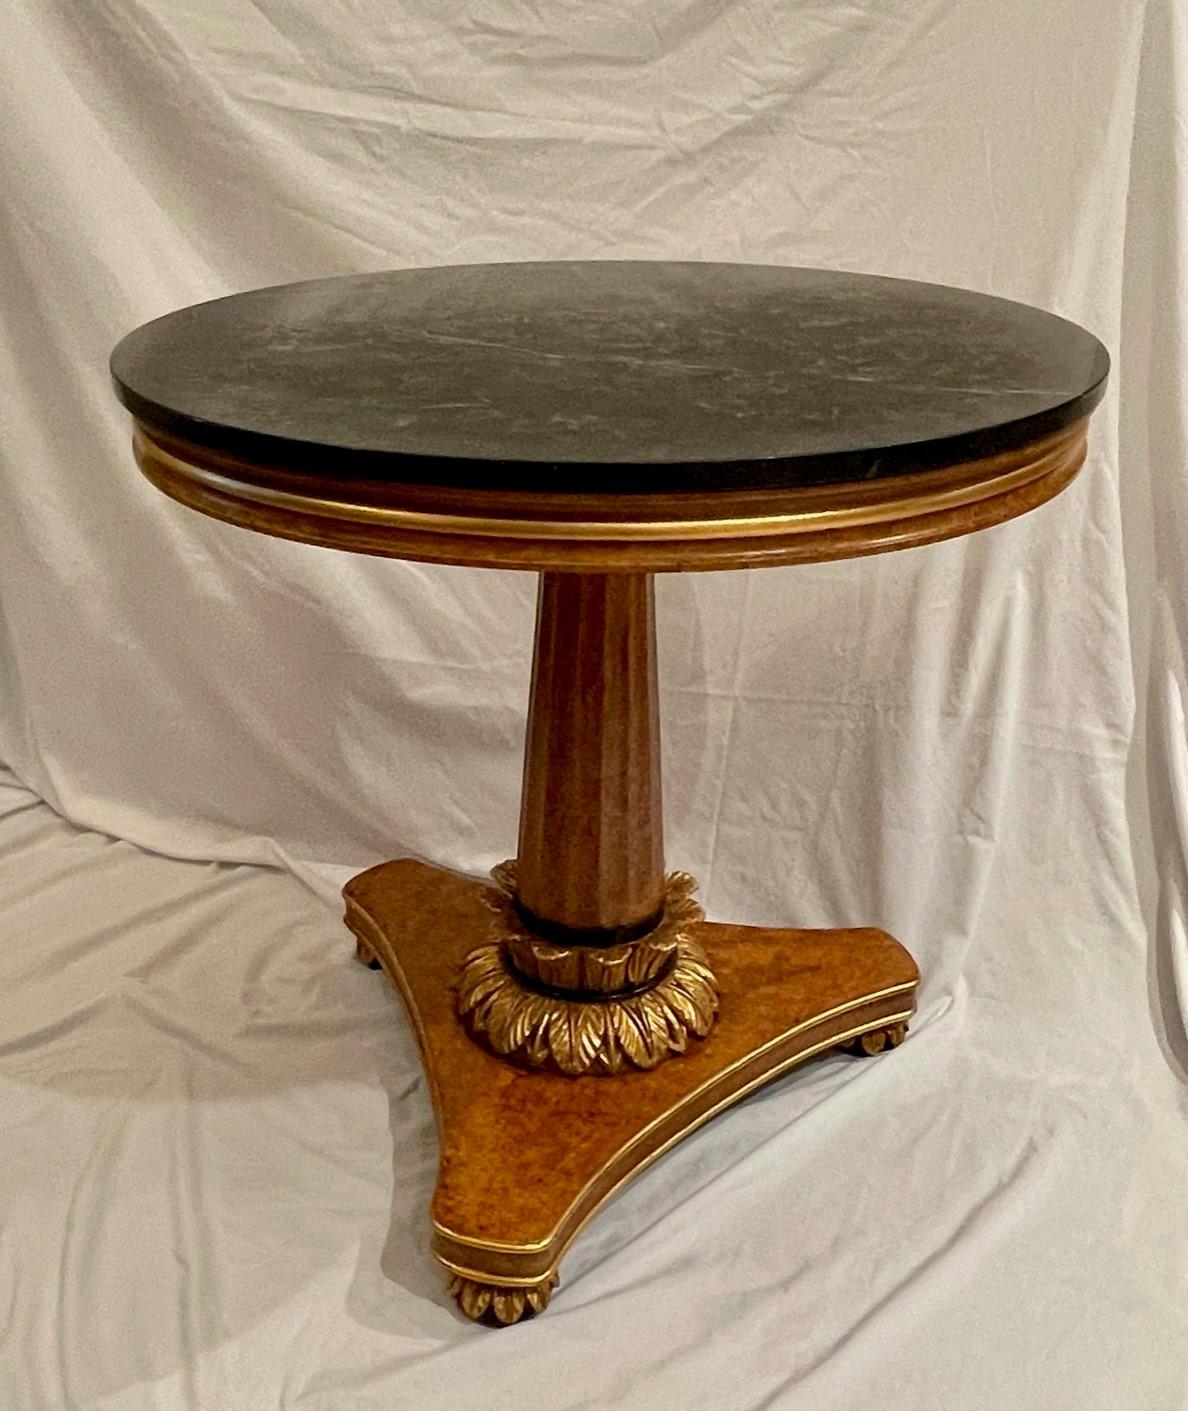 Italian Biedermeier Table Carved Giltwood Marquina Marble Top Invitinghome For Sale